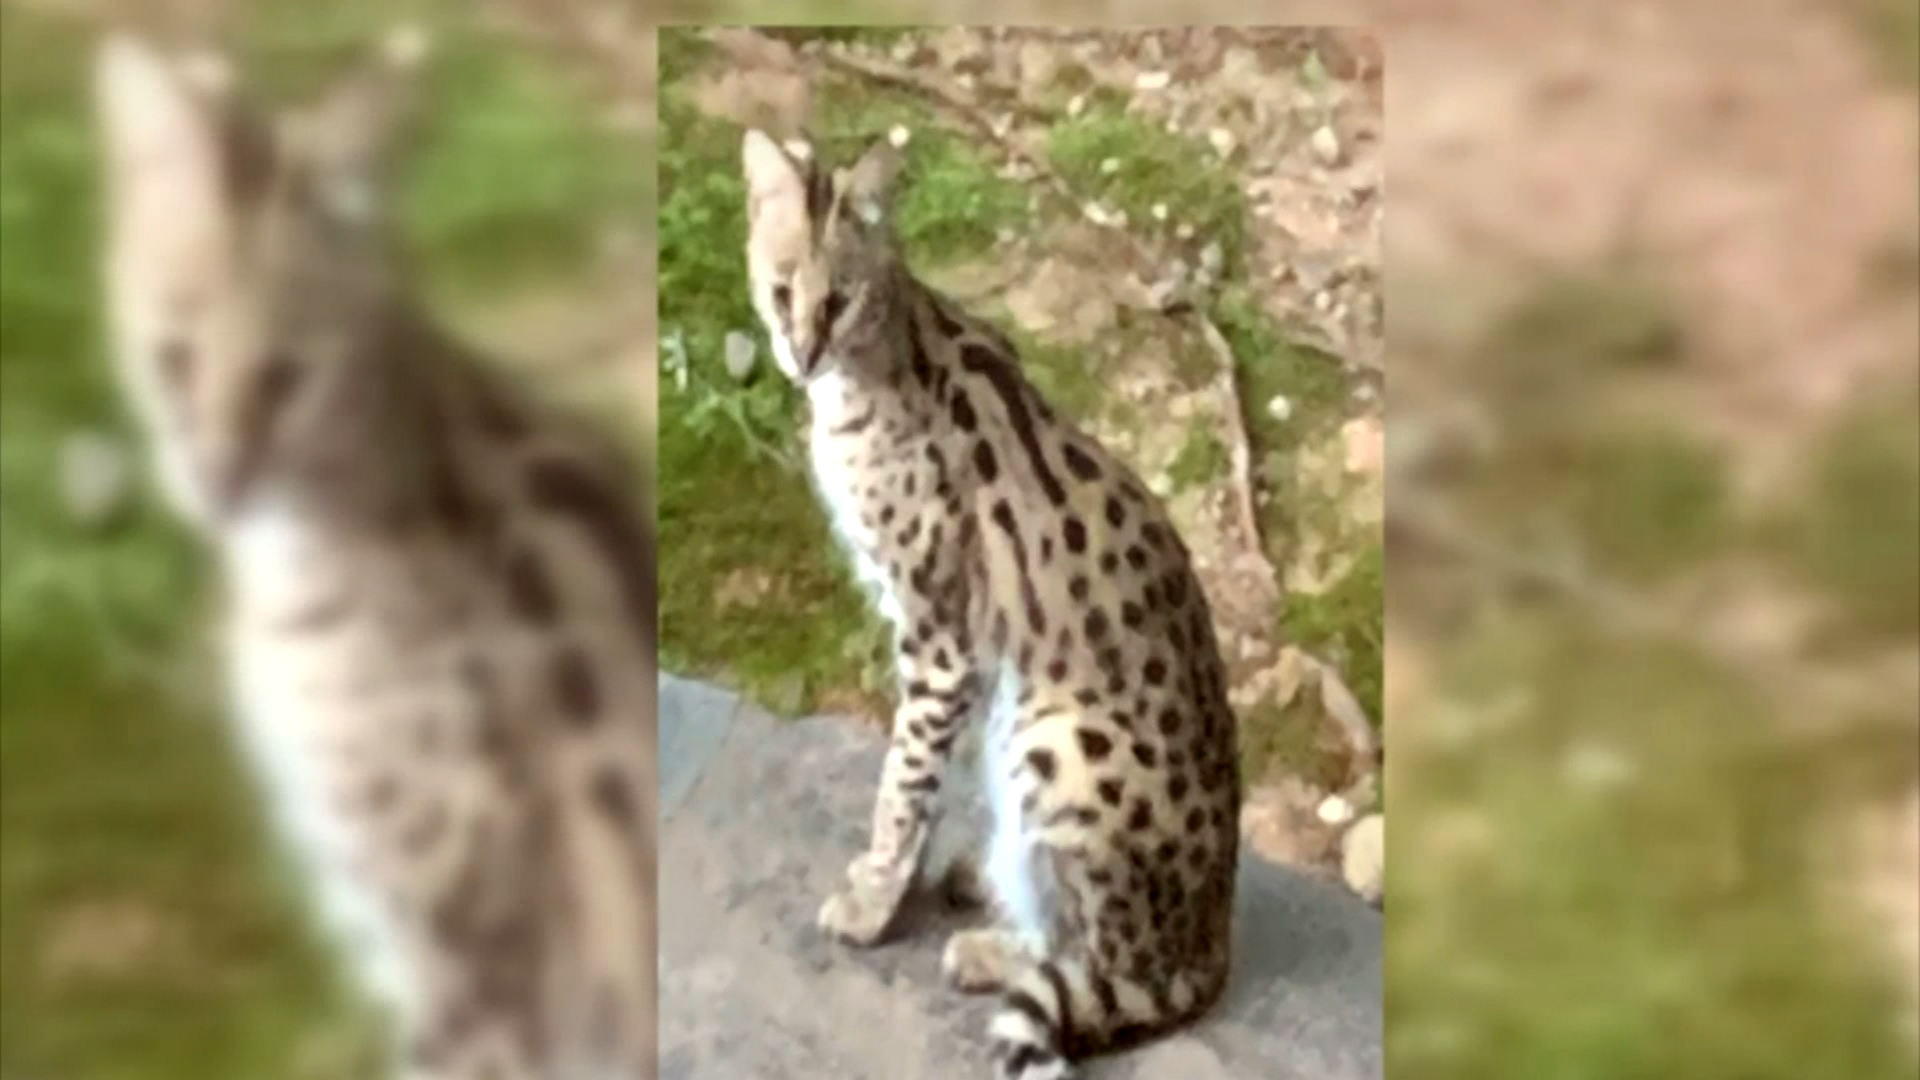 A Georgia woman was in for a rude awakening when she discovered a serval in her bedroom.